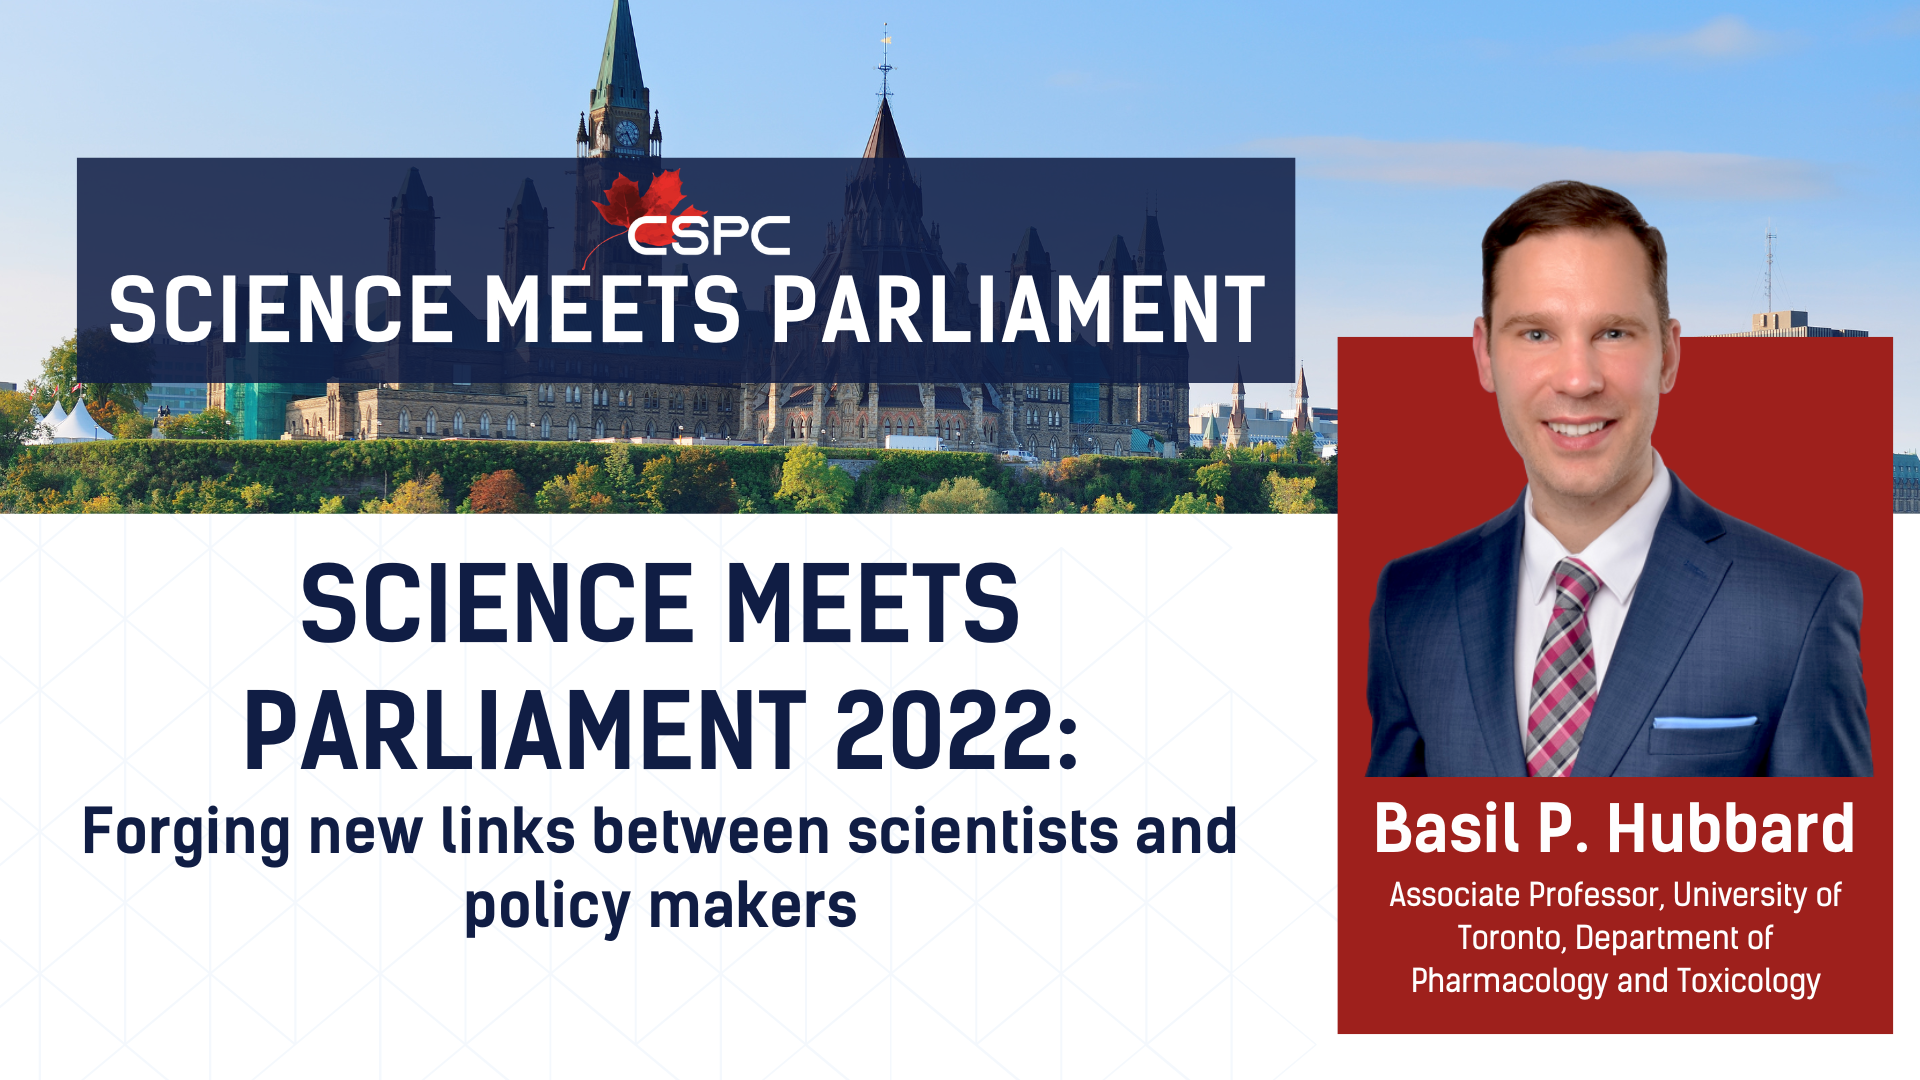 a banner with the text "Science Meets Parliament 2022: Forging new links between scientists and policy makers" alongside the headshot of a white man